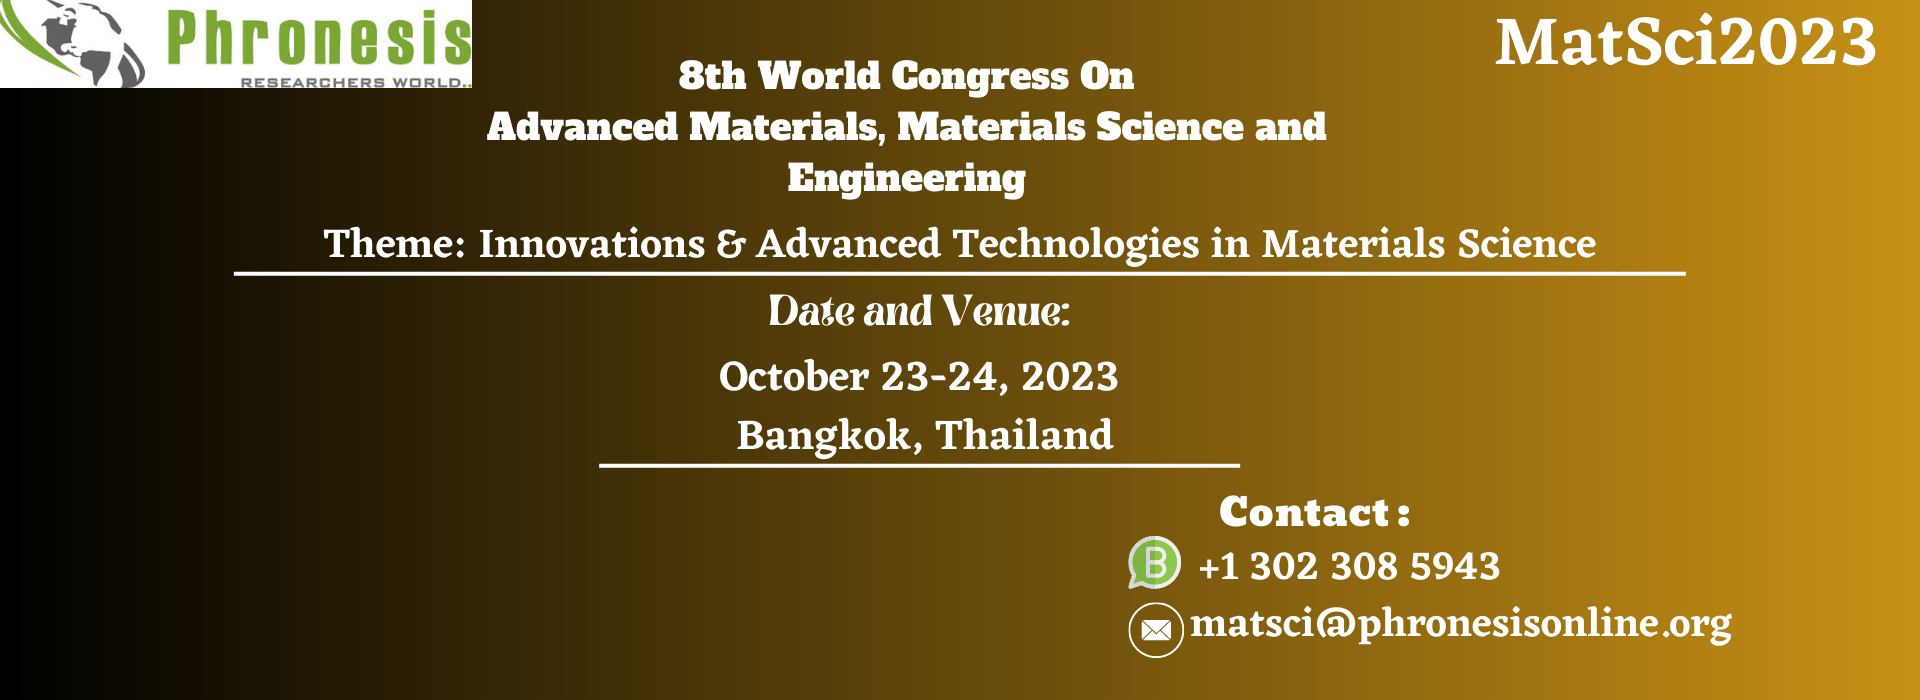 8th World Congress On Advanced Materials, Materials Science and Engineering (MatSci 2023) 1